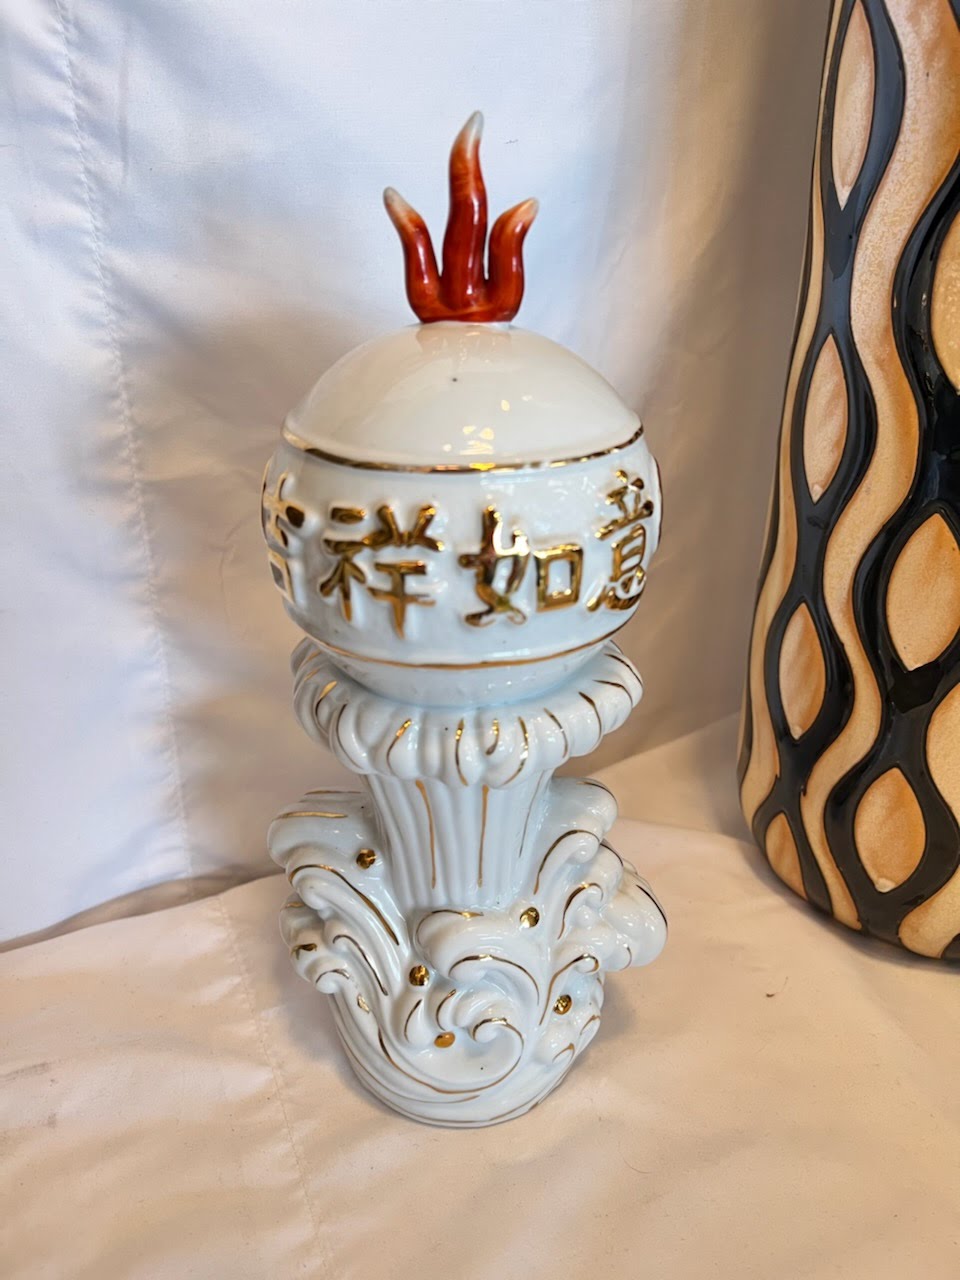 Porcelain decor with red flame on top